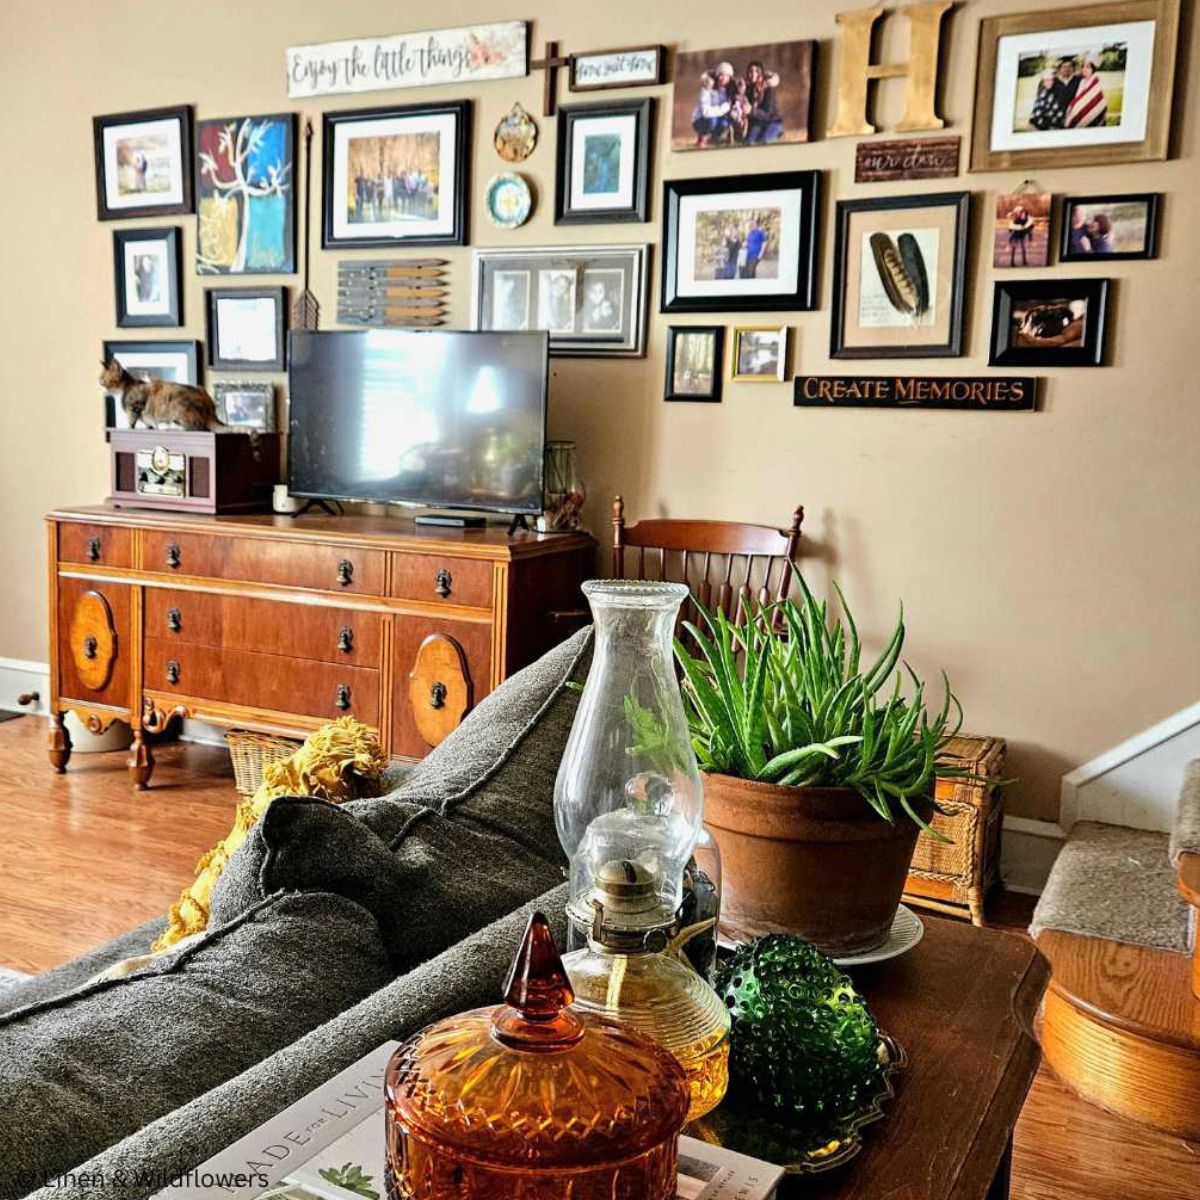 A antique sideboard in a cozy living room used to hold a tv & vintage stereo. Behind a the sofa is a sidetable with a aloe vera plant, oil lamp, amber color candy dish & a fenton circle dish.